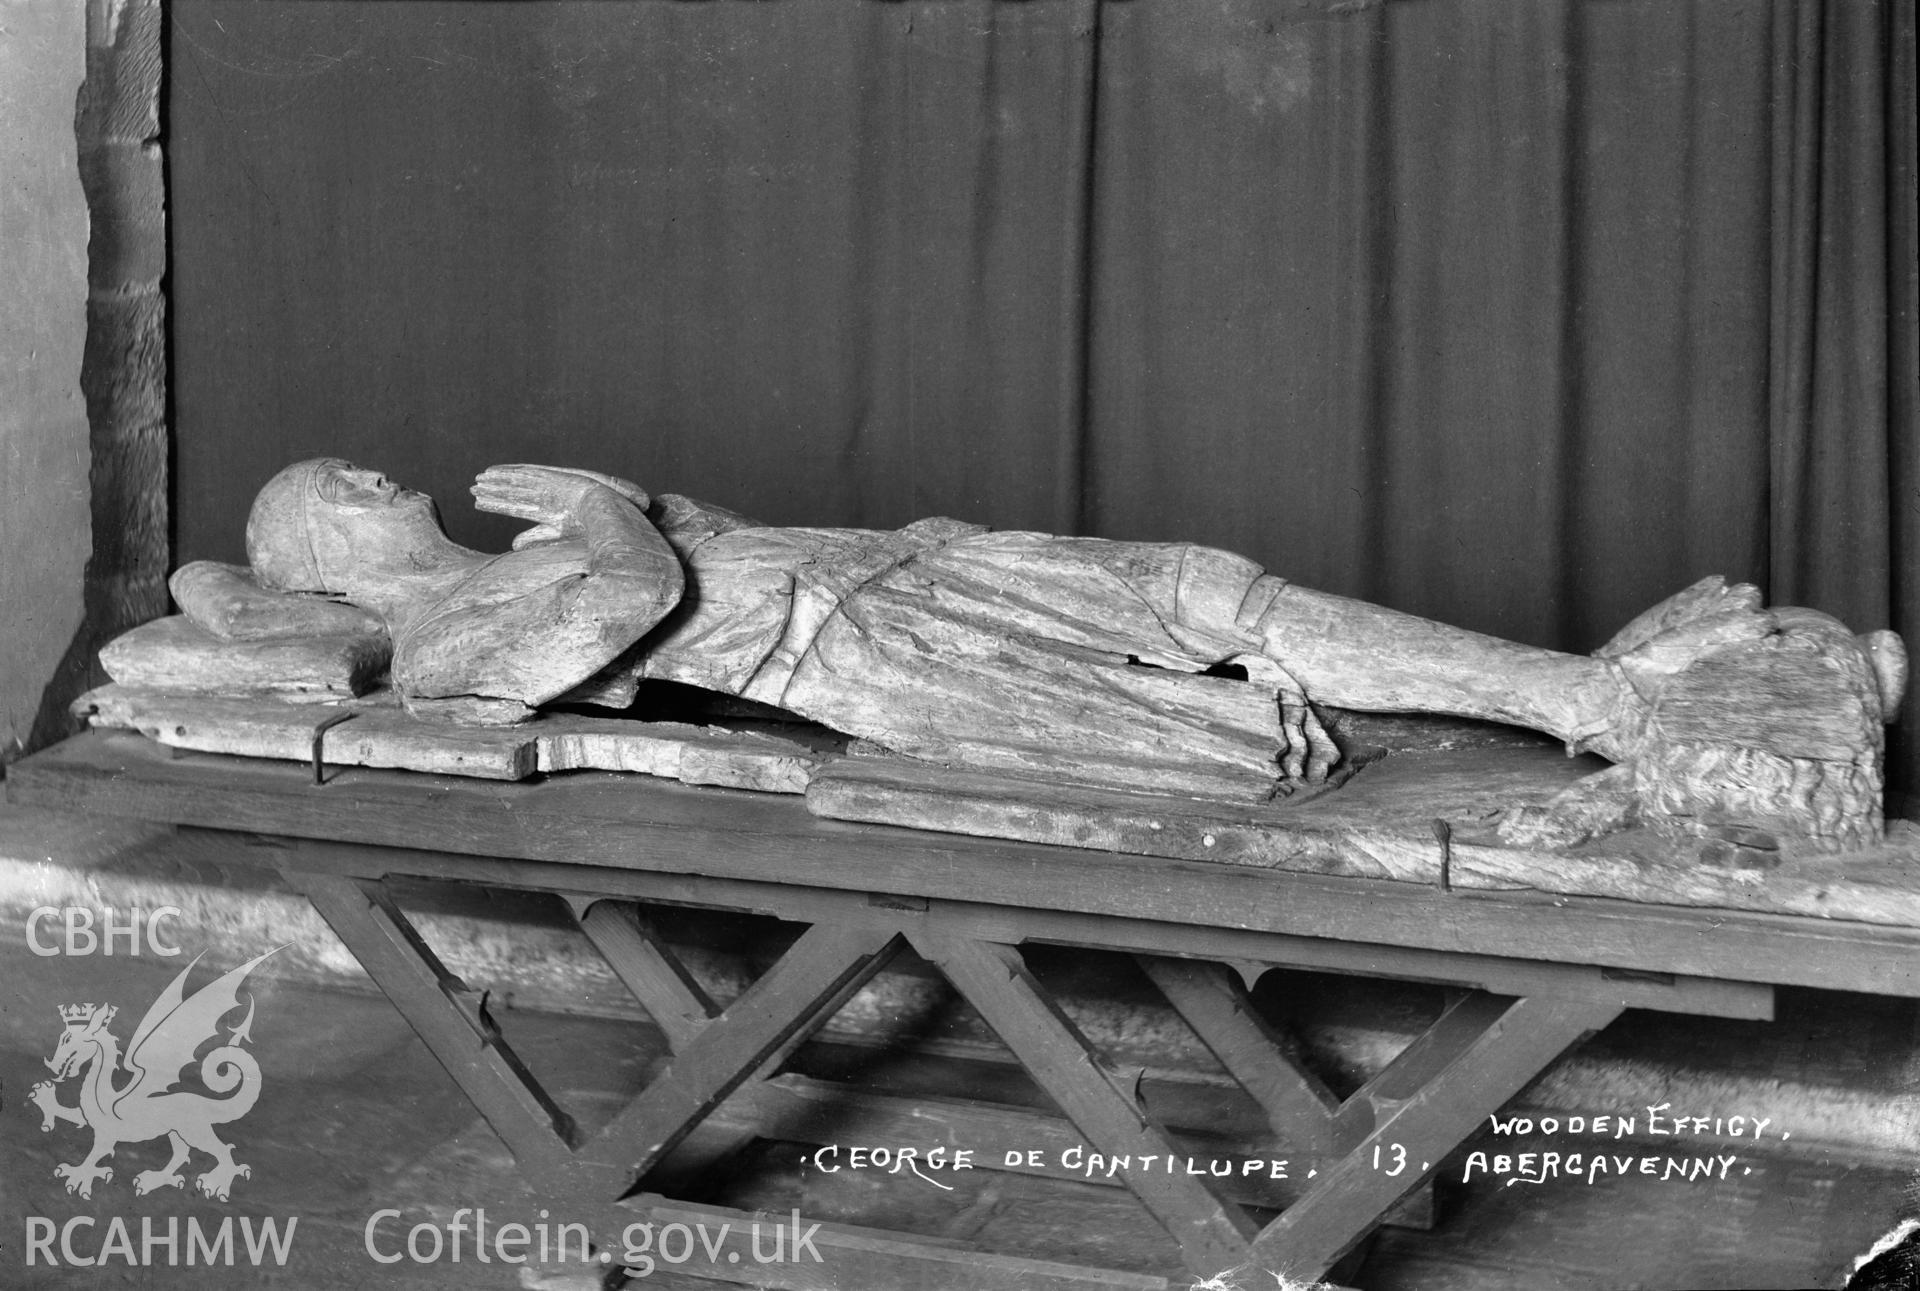 Interior view of St Mary's Church Abergavenny showing the wooden effigy of George de Cantaloupe, taken by W A Call.